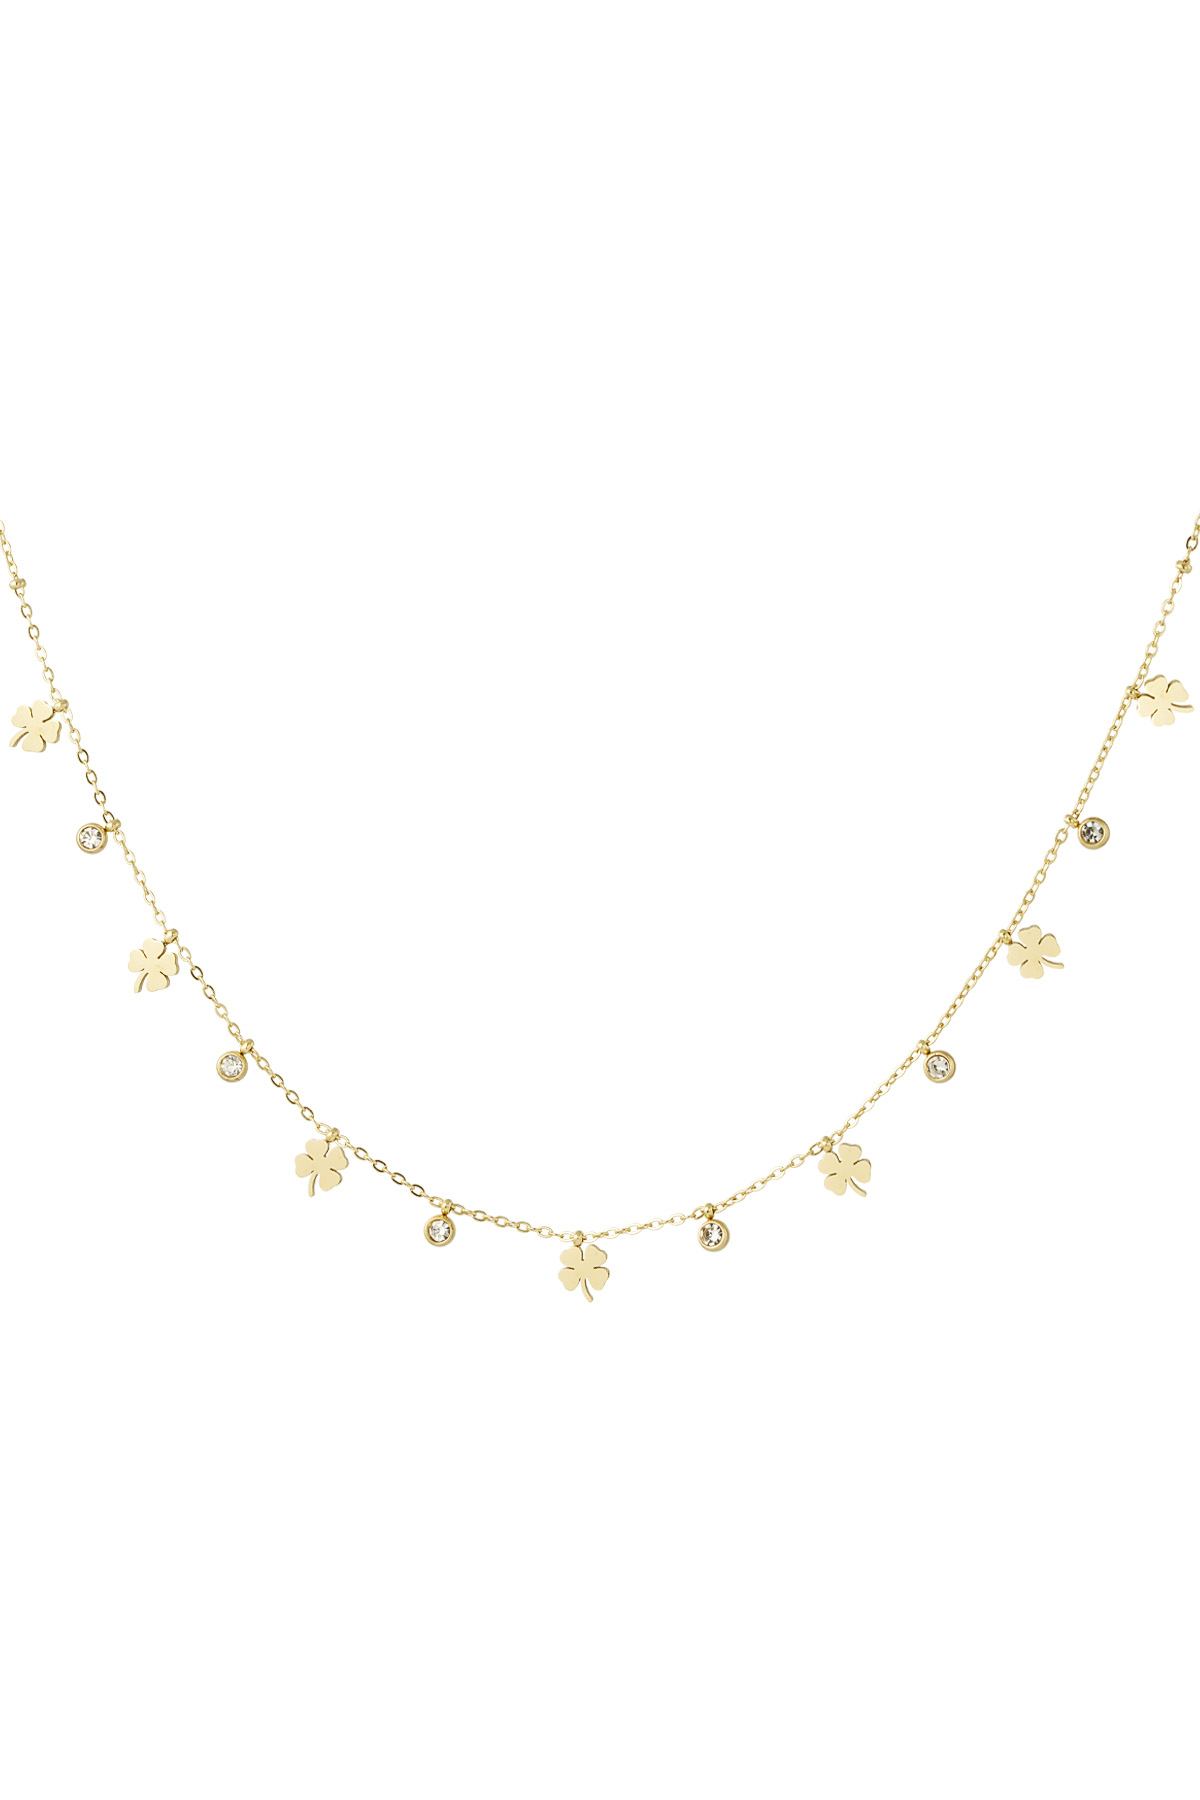 Charm necklace with clover and diamonds - gold 